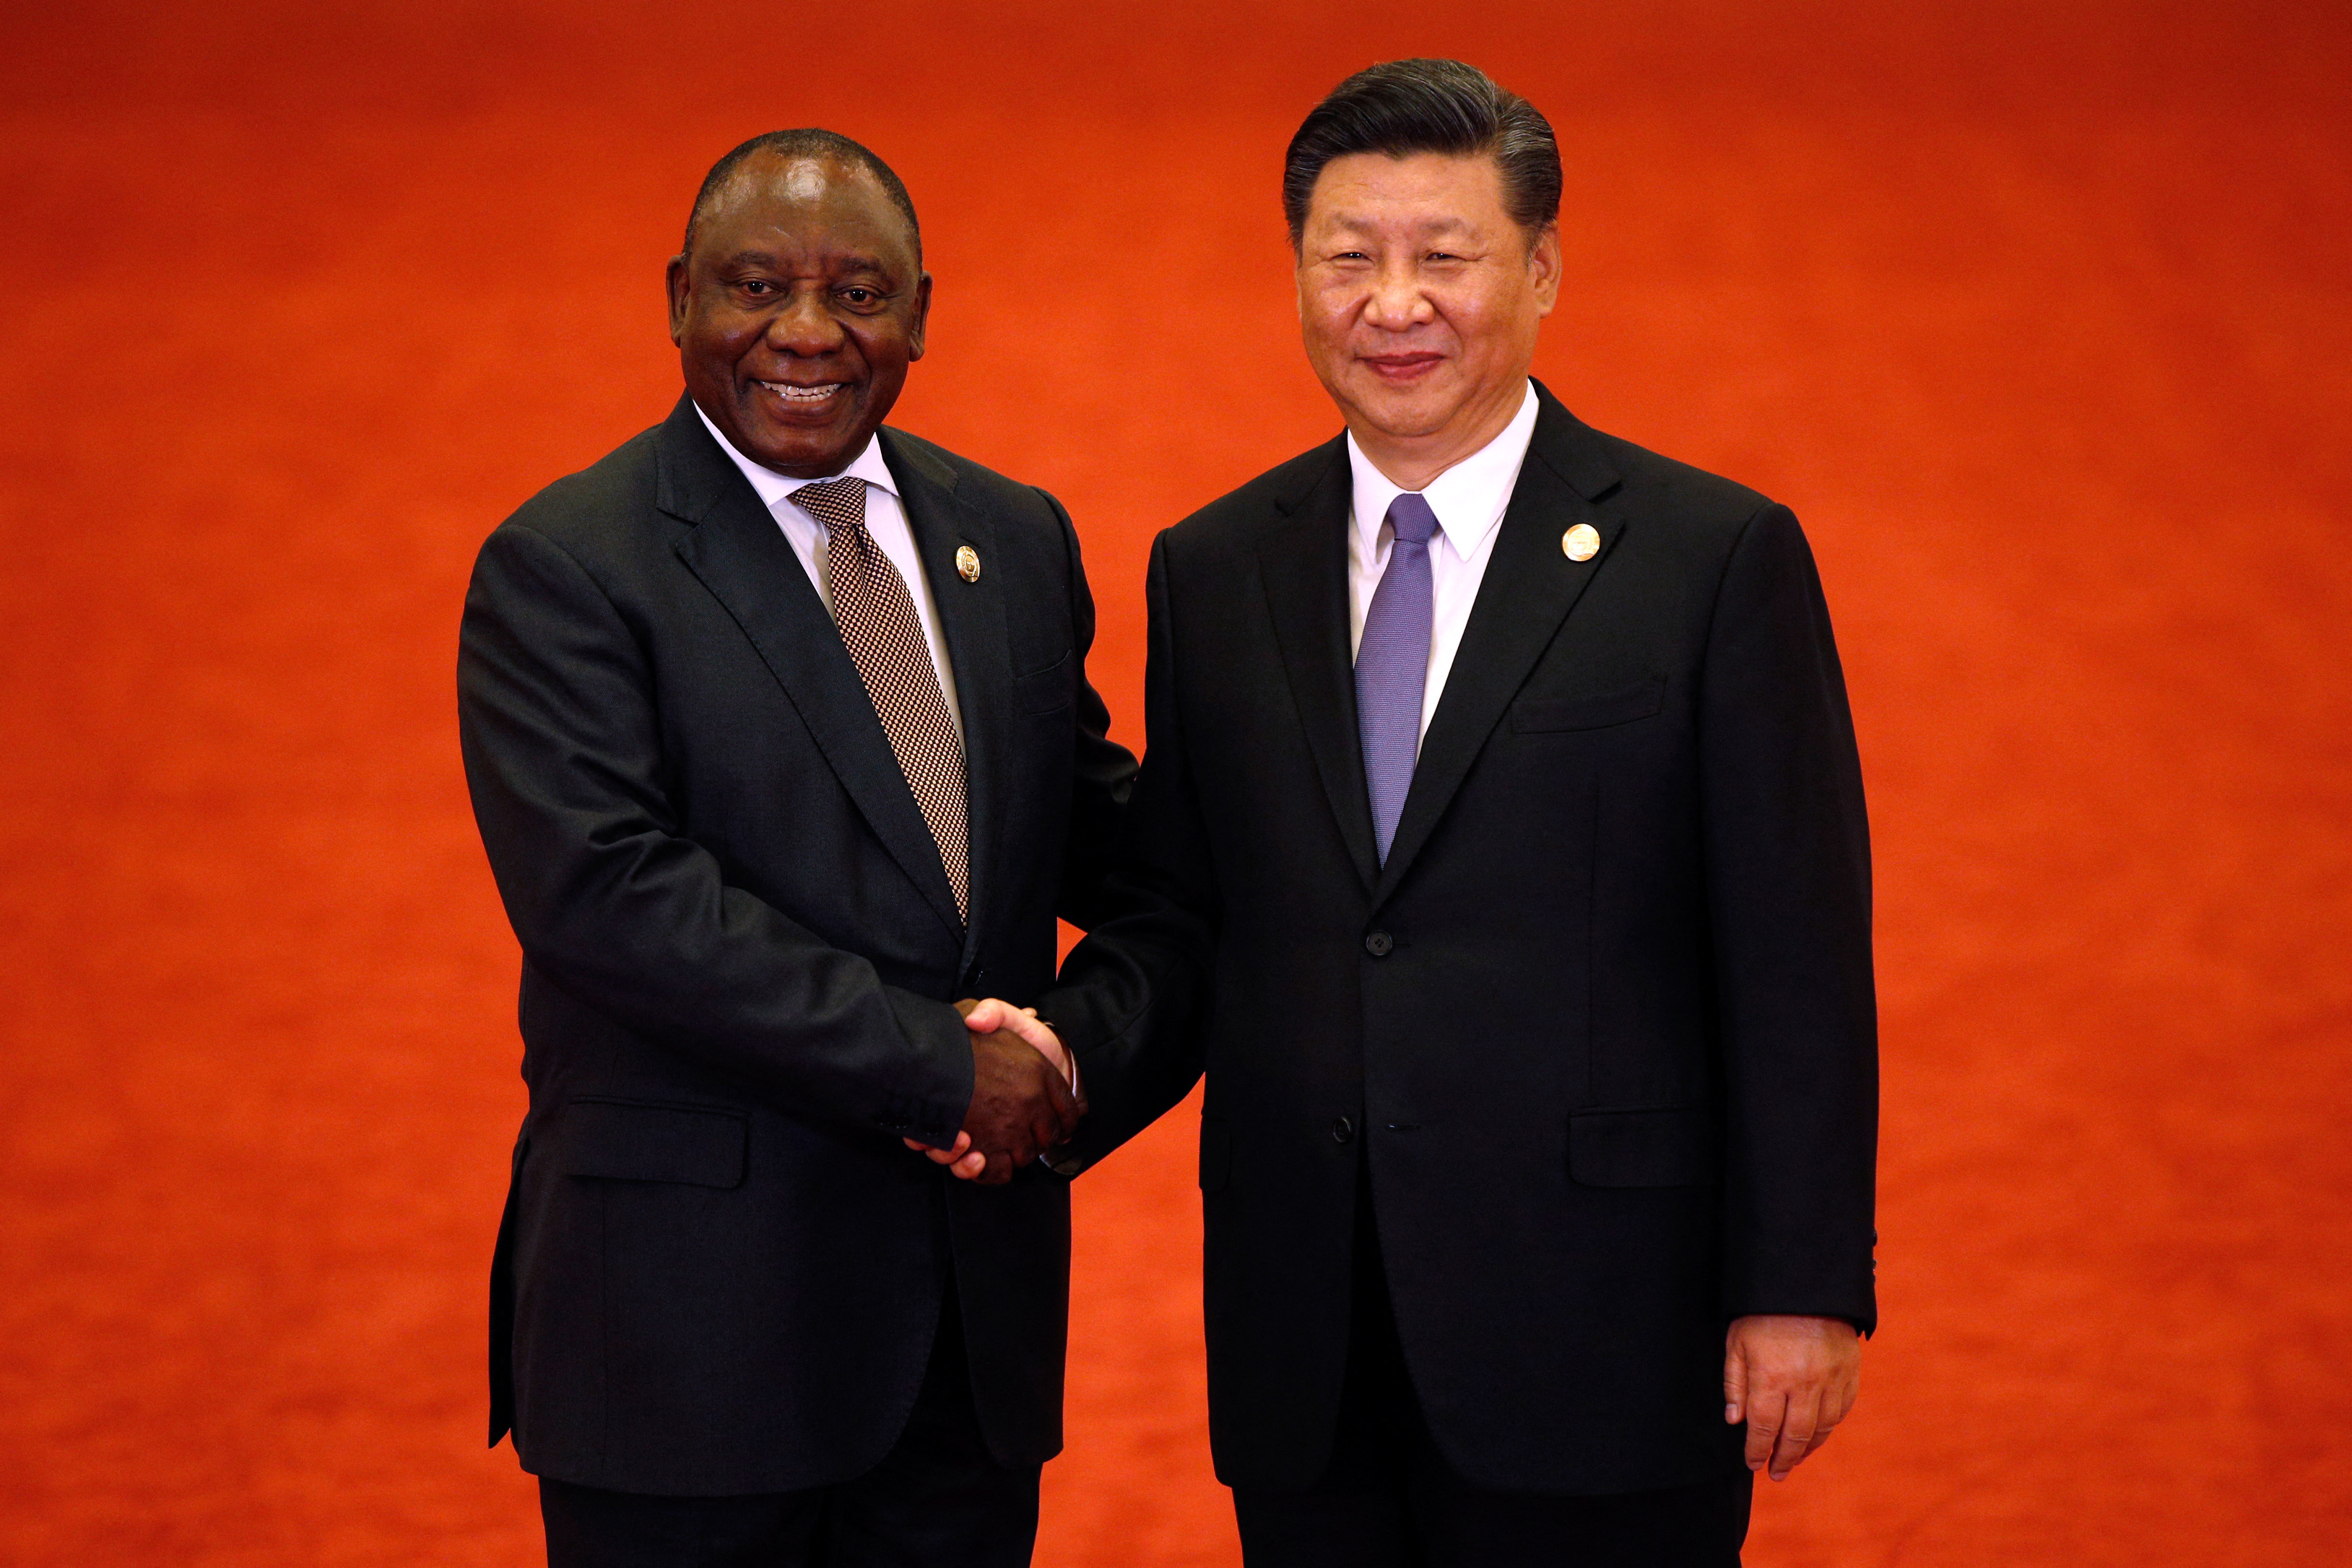 South African President Cyril Ramaphosa will welcome China’s President Xi Jinping as well as other leaders at the Brics summit on August 22. Photo: AFP